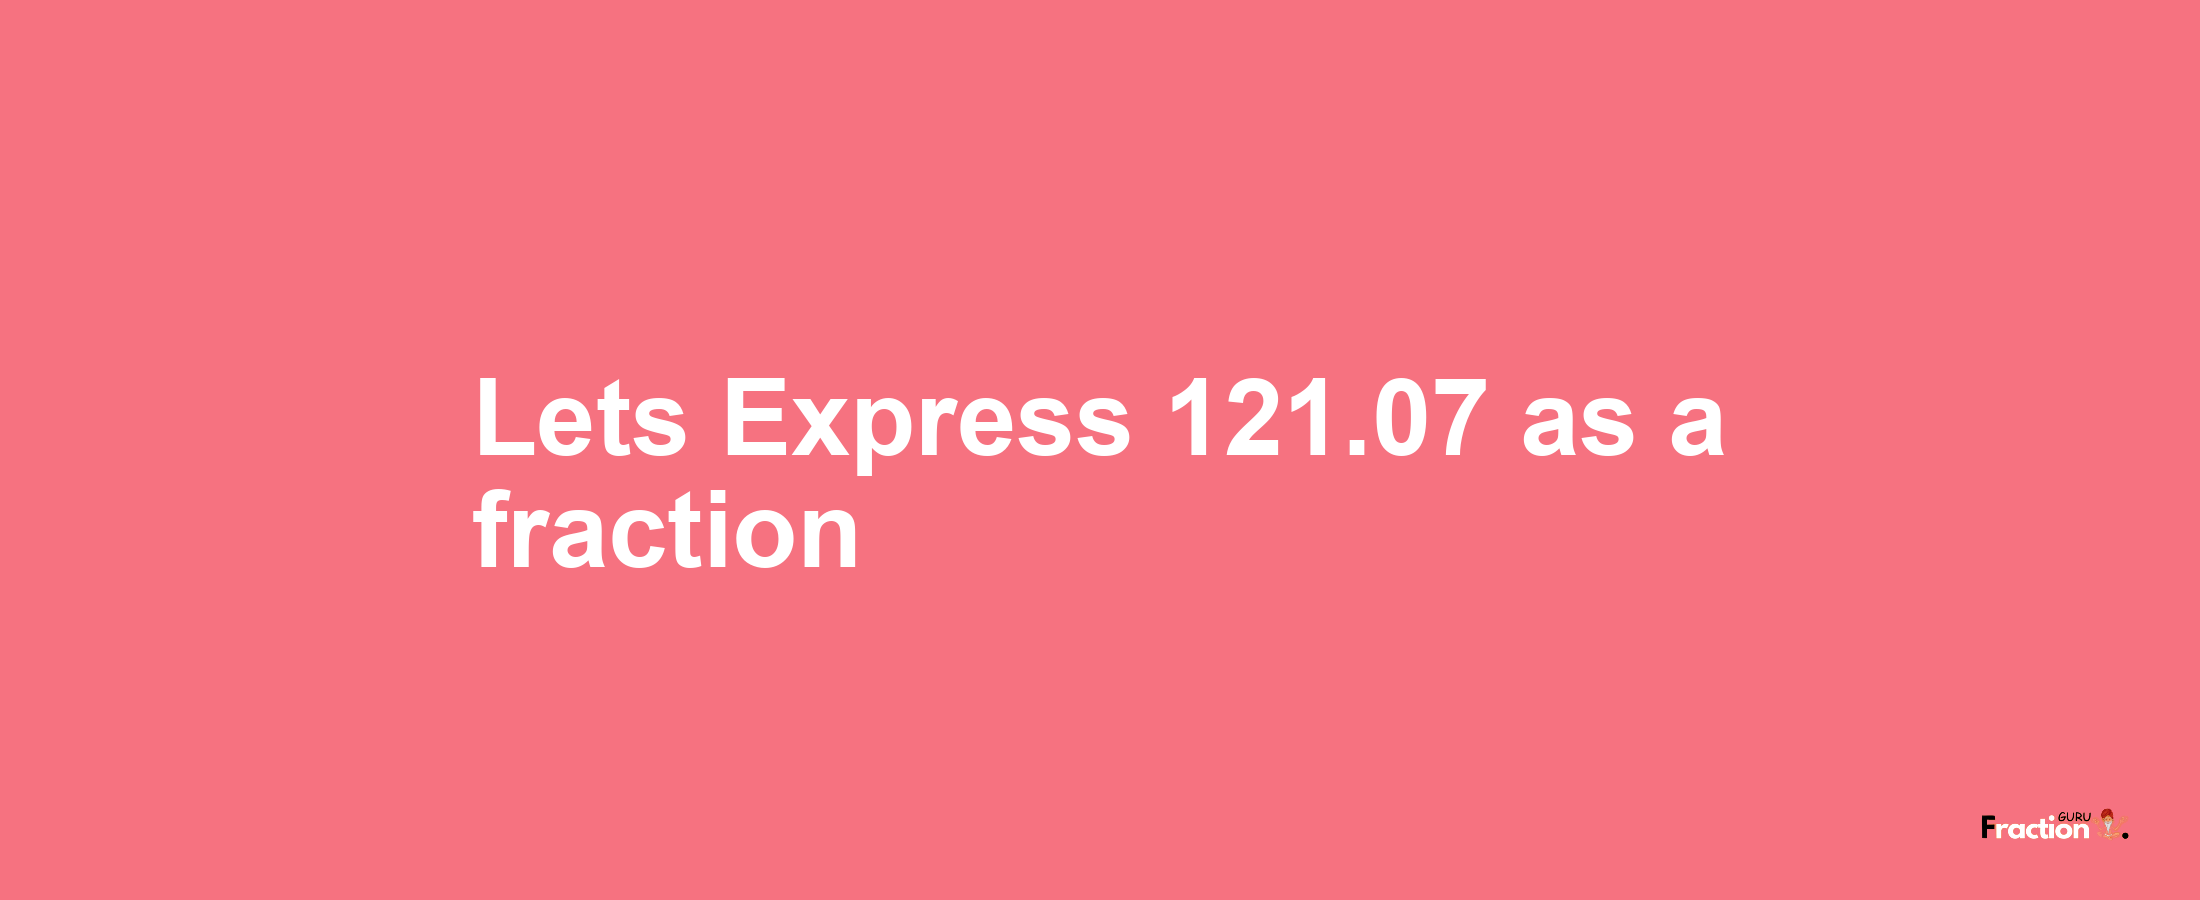 Lets Express 121.07 as afraction